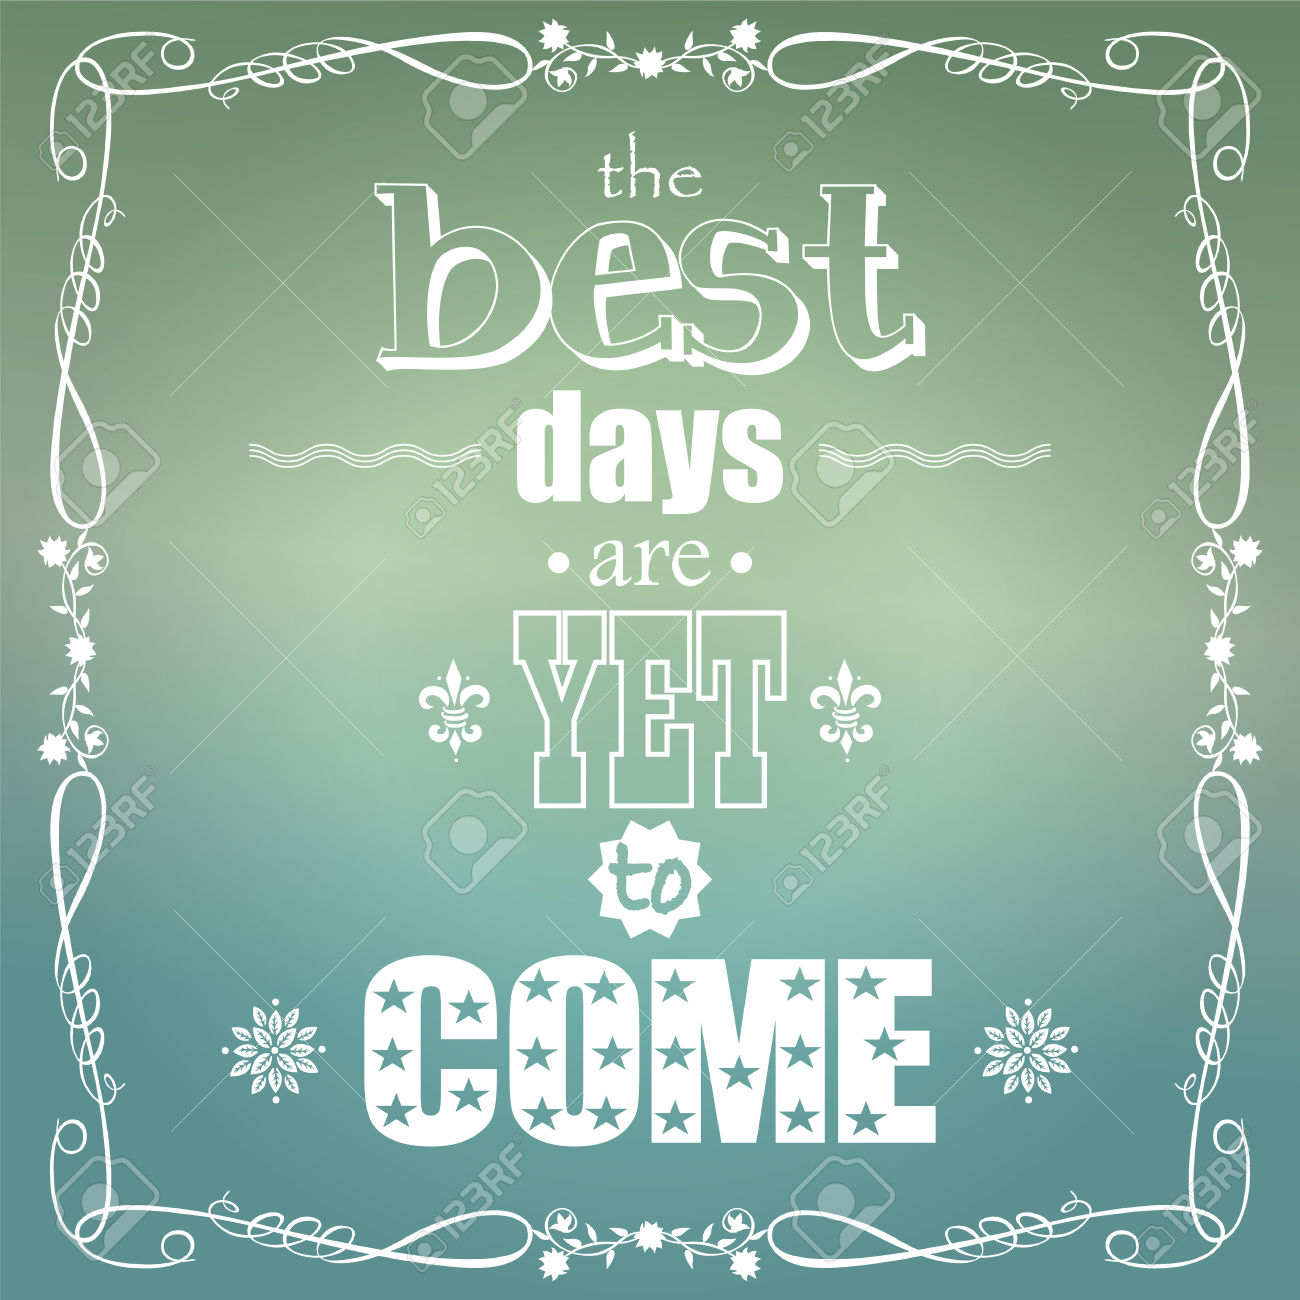 Photo:  24876124-The-best-days-are-yet-to-come-quote-typographical-background-Stock-Vector